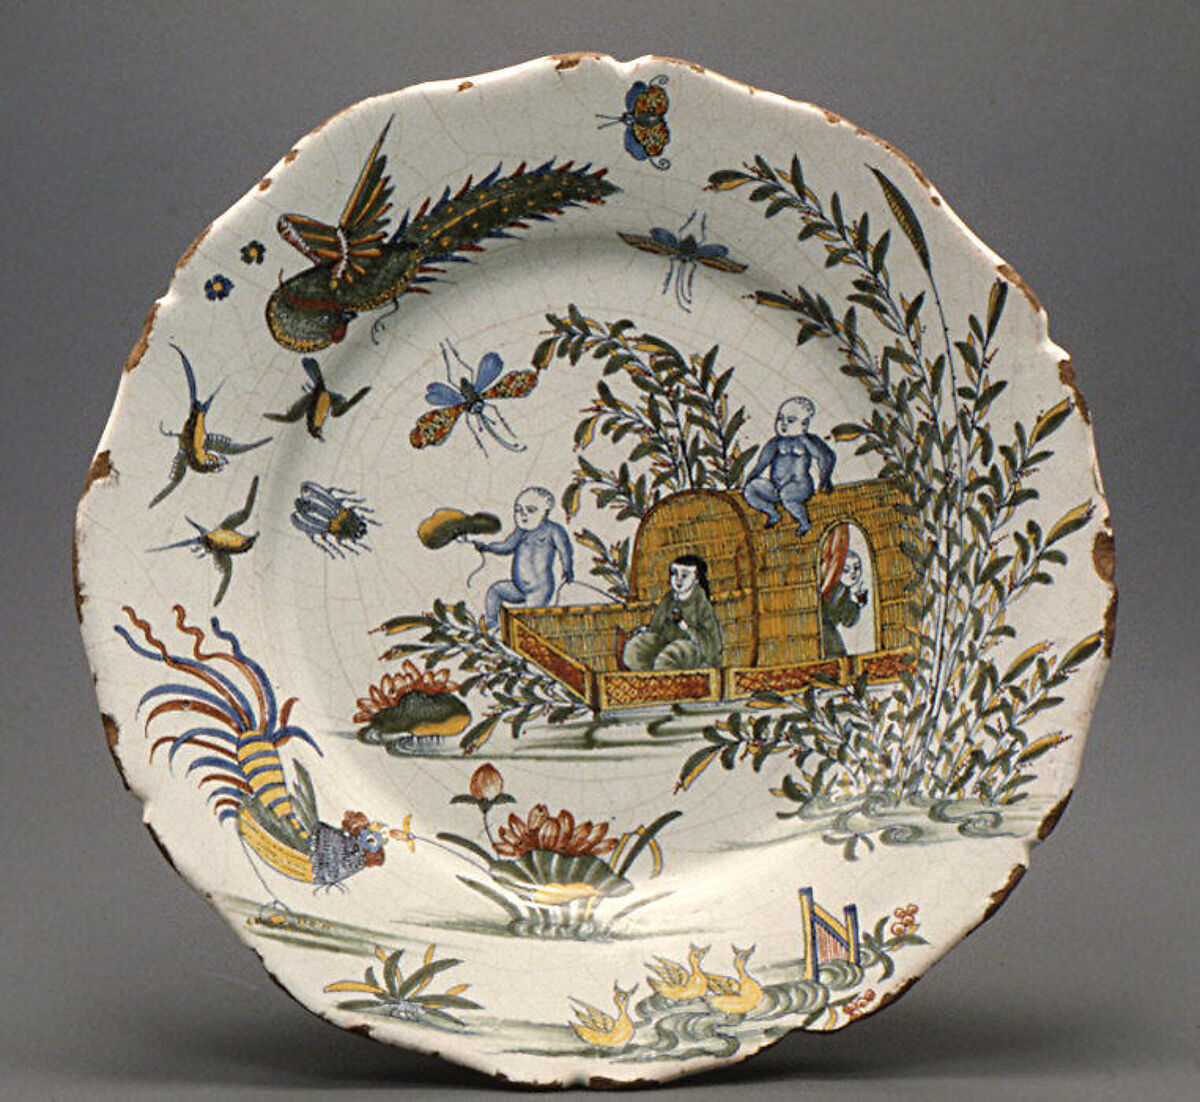 Plate, Faience (tin-glazed earthenware), French, Rouen or Sinceny 